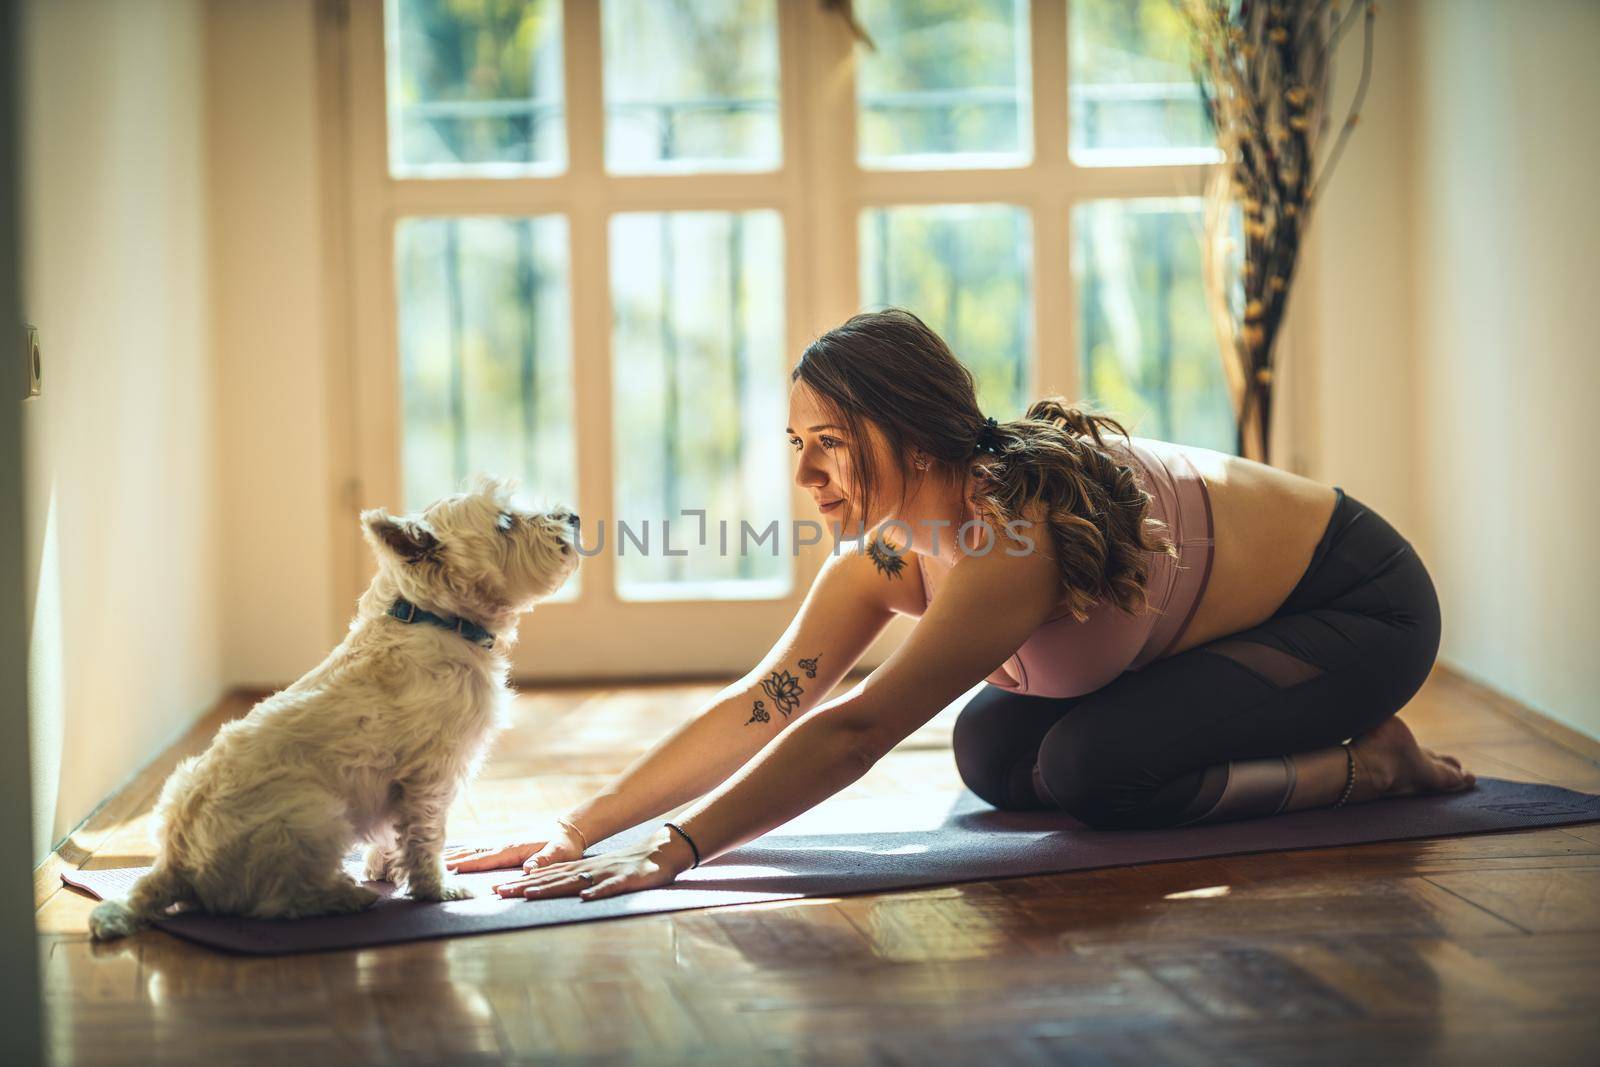 Young woman is relaxing with her sweetie dog pet during coronavirus pandemic doing yoga meditation in the living room at home. She is meditating on floor mat in morning sunshine.